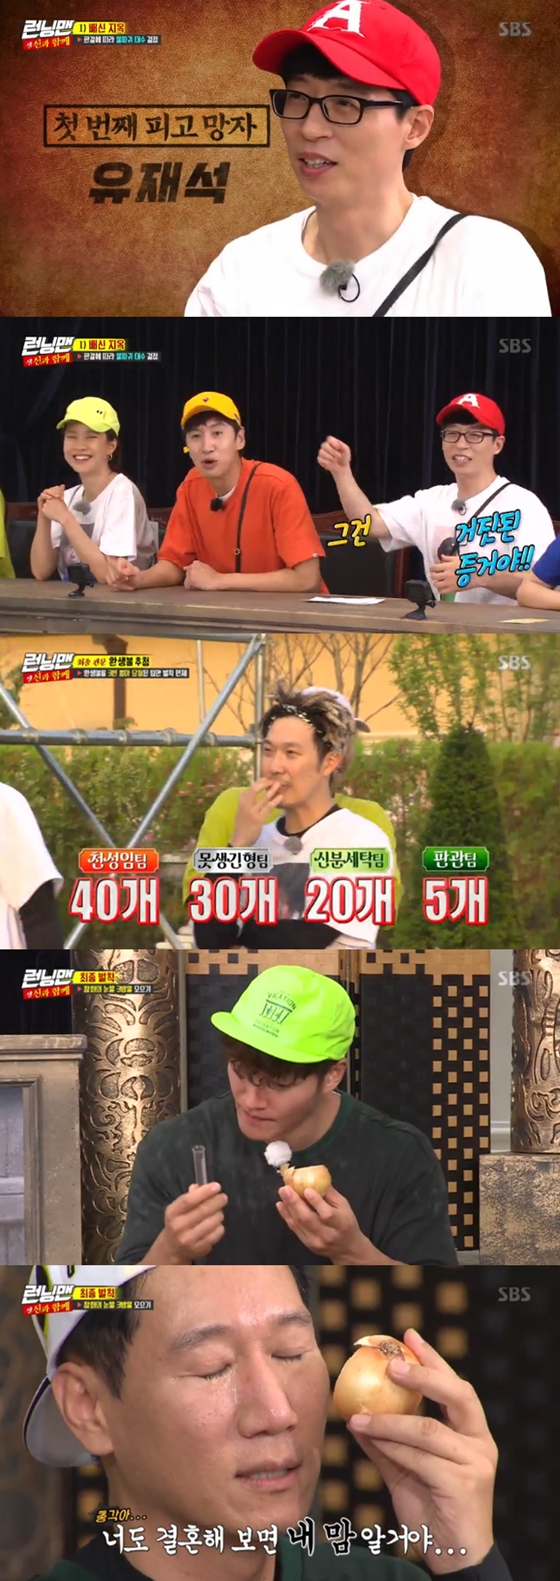 Song Ji-hyo, Yoo Jae-Suk and Haha in Running Man succeeded in Dead Again after twists and turns.SBS Running Man, which was broadcasted on the afternoon of the 26th, was decorated with Dead Again Race, a parody of the movie With God.The one who was tried on the day and aimed for Dead Again was Yoo Jae-Suk, Haha and Song Ji-hyo, who celebrated their birthday in August.In addition, Jeon So-min, Yang Se-chan and Lee Kwang-soo were the low-passengers to help the Dead Again of these three dead.Ji Suk-jin and Kim Jong-kook also acted as judges to prevent Dead Again by accusing the dead of their life sins.Alongside this, Noh Sa-yeon appeared as the role of Queen Yeomra (the Great King), who judges the sins of the dead, whether or not Dead Again is present.The trial for Dead Again by Yoo Jae-Suk, Haha and Song Ji-hyo drew laughter as the revelation battle continued from the start.In particular, Yoo Jae-Suk had a war of words over his affection for his wife, Na Kyung, who had been re-verified for his wifes love, which had been found to be false in the past lie detectors.Yeomla Noh Sa-yeon ruled that she was innocent.Haha was then convicted of distrust and betrayal; with Lee Sang-yeop as a witness, he was convicted after repeated reversals.The game was divided into four teams, including the judges, who had to win many Dead Again balls and pick their names in the future to make Dead Again possible.Song Ji-hyo first came out of the Dead Again Ball draw, followed by Yoo Jae-Suk and Haha.Successful for Dead Again.Judges Kim Jong-kook and Ji Suk-jin failed to win the Dead Again Bowl draw, resulting in a final penalty.The two men had to get three drops of penance tears before they could leave.Kim Jong-kook first shed three tears and left work, and Ji Suk-jin brought onions to his eyes, but he could not shed tears.